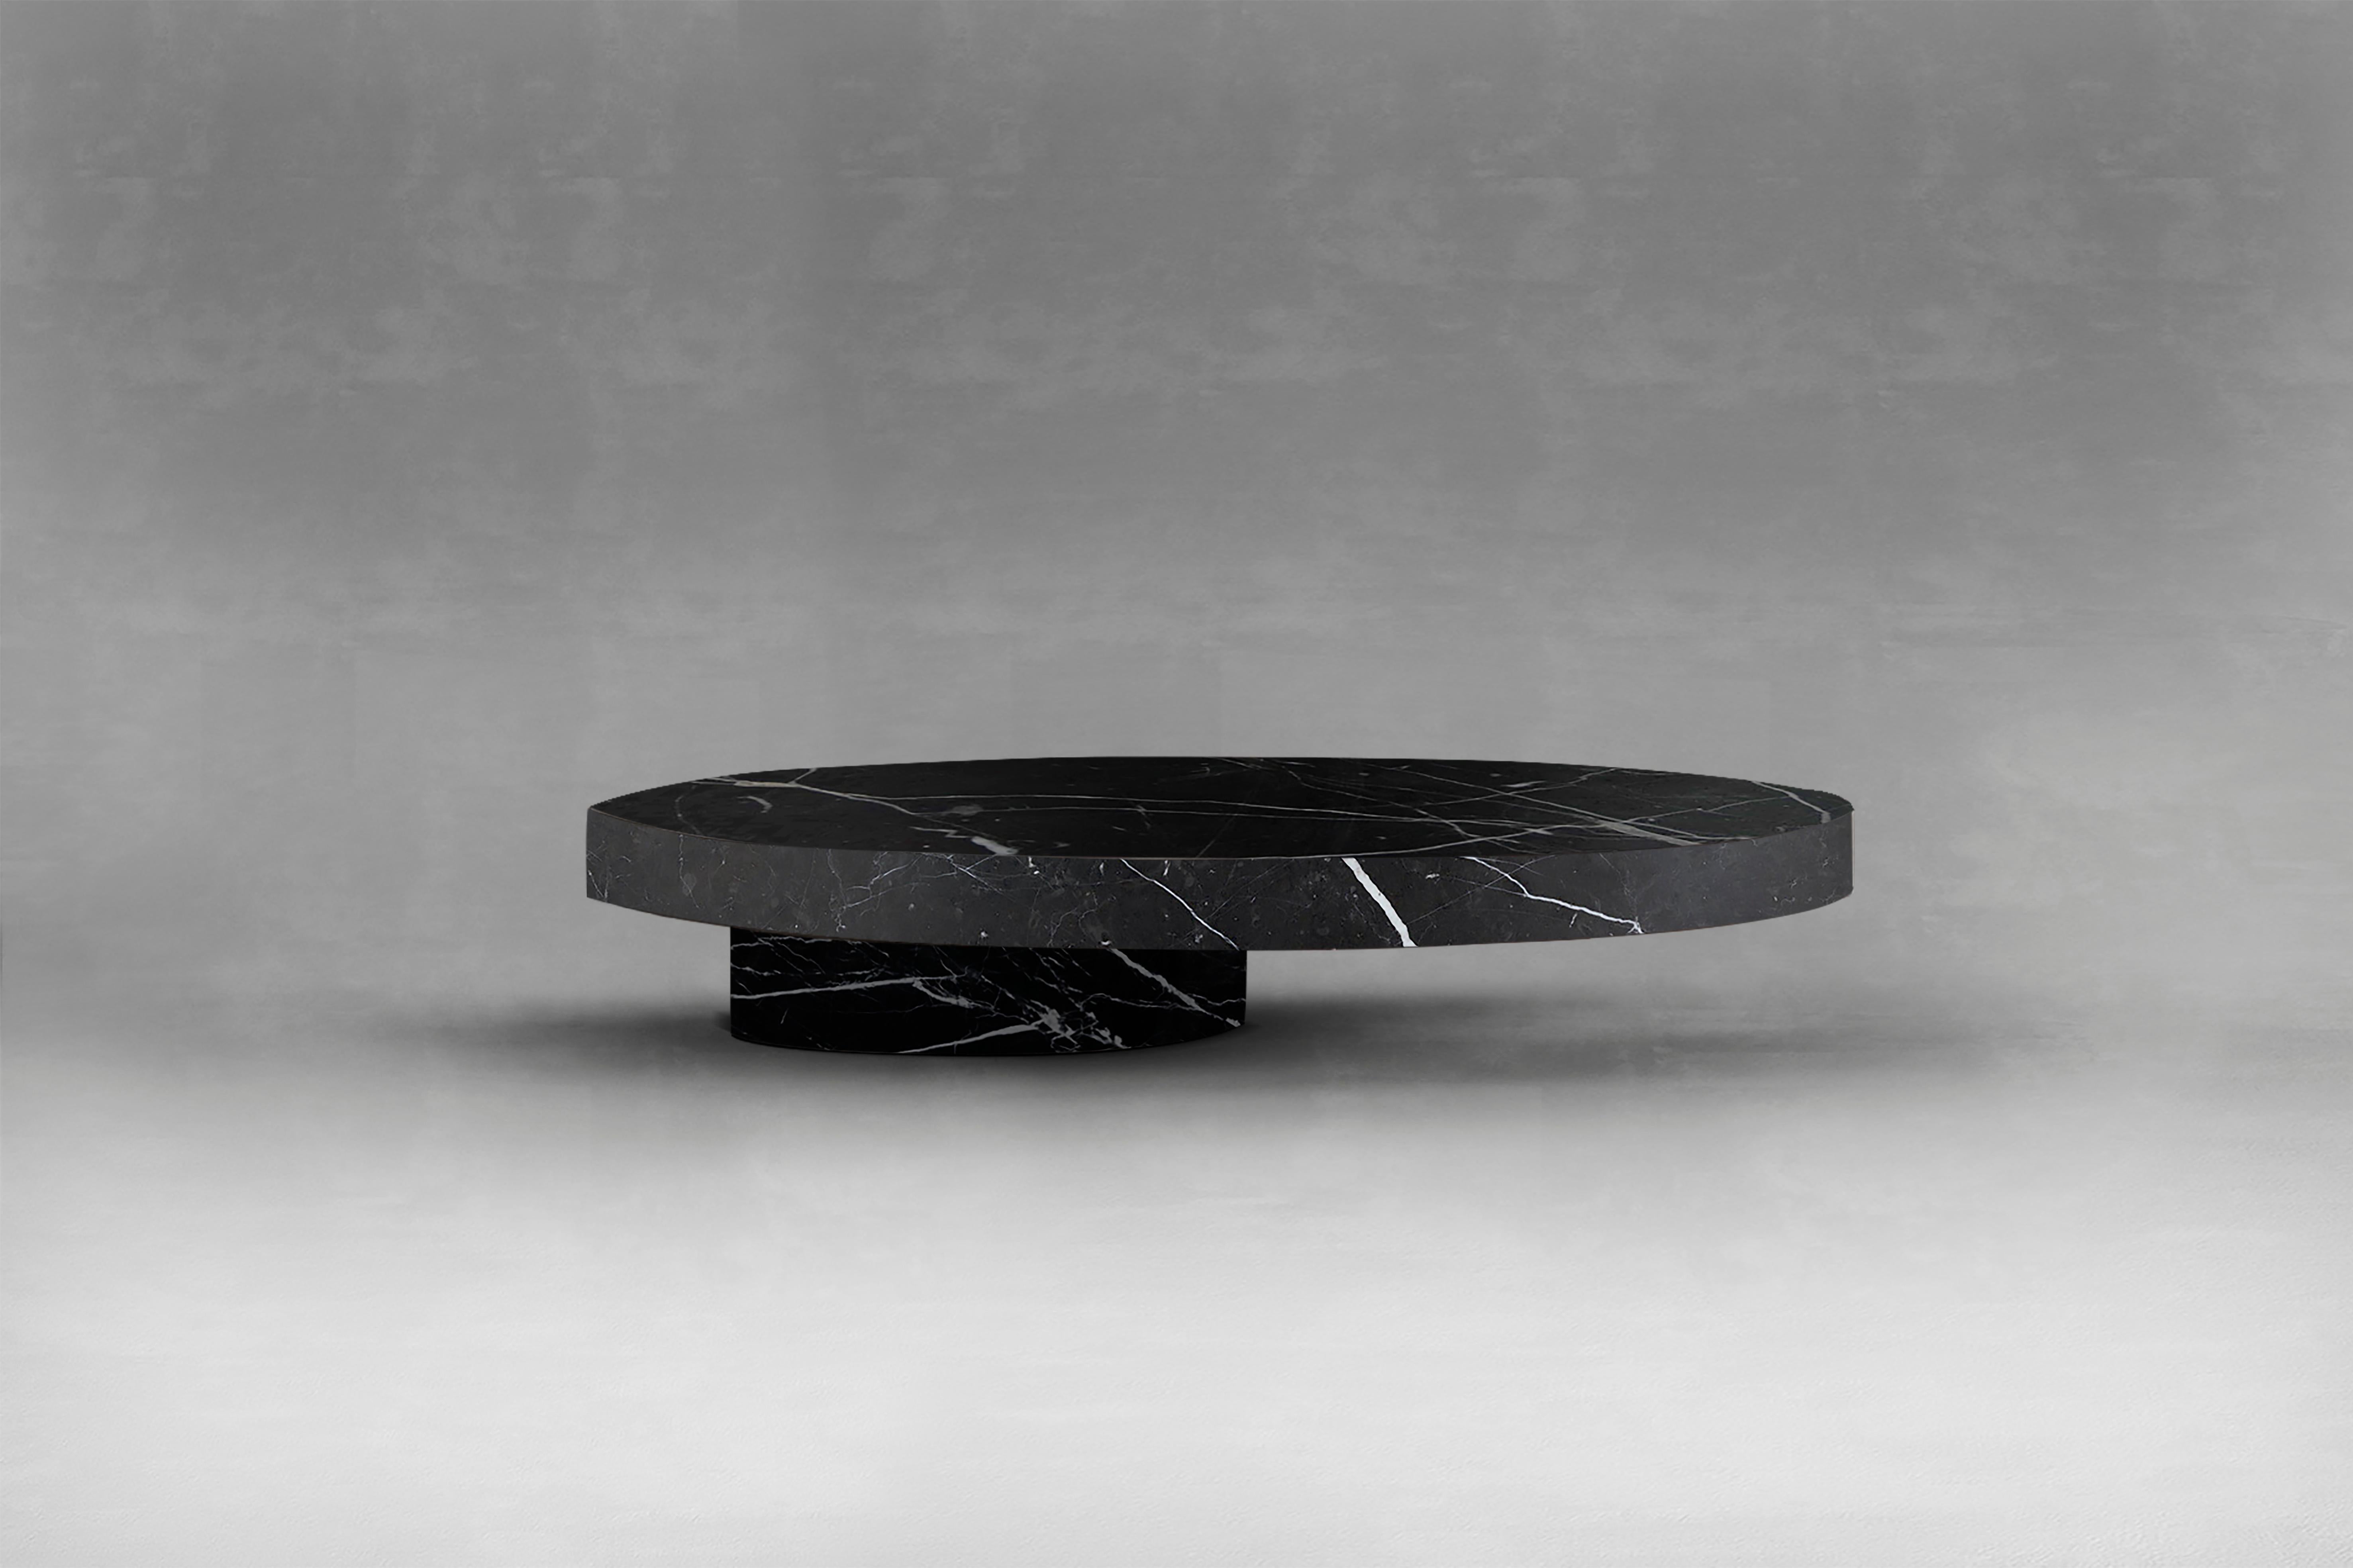 Bassa Center Table in Nero Marquina Marble by Collector Studio

Is like having a huge block of Marble. This Nero Marquina table will not only look beautifull but will also feel incredible as it is finished with a smooth finish that will cast amazing